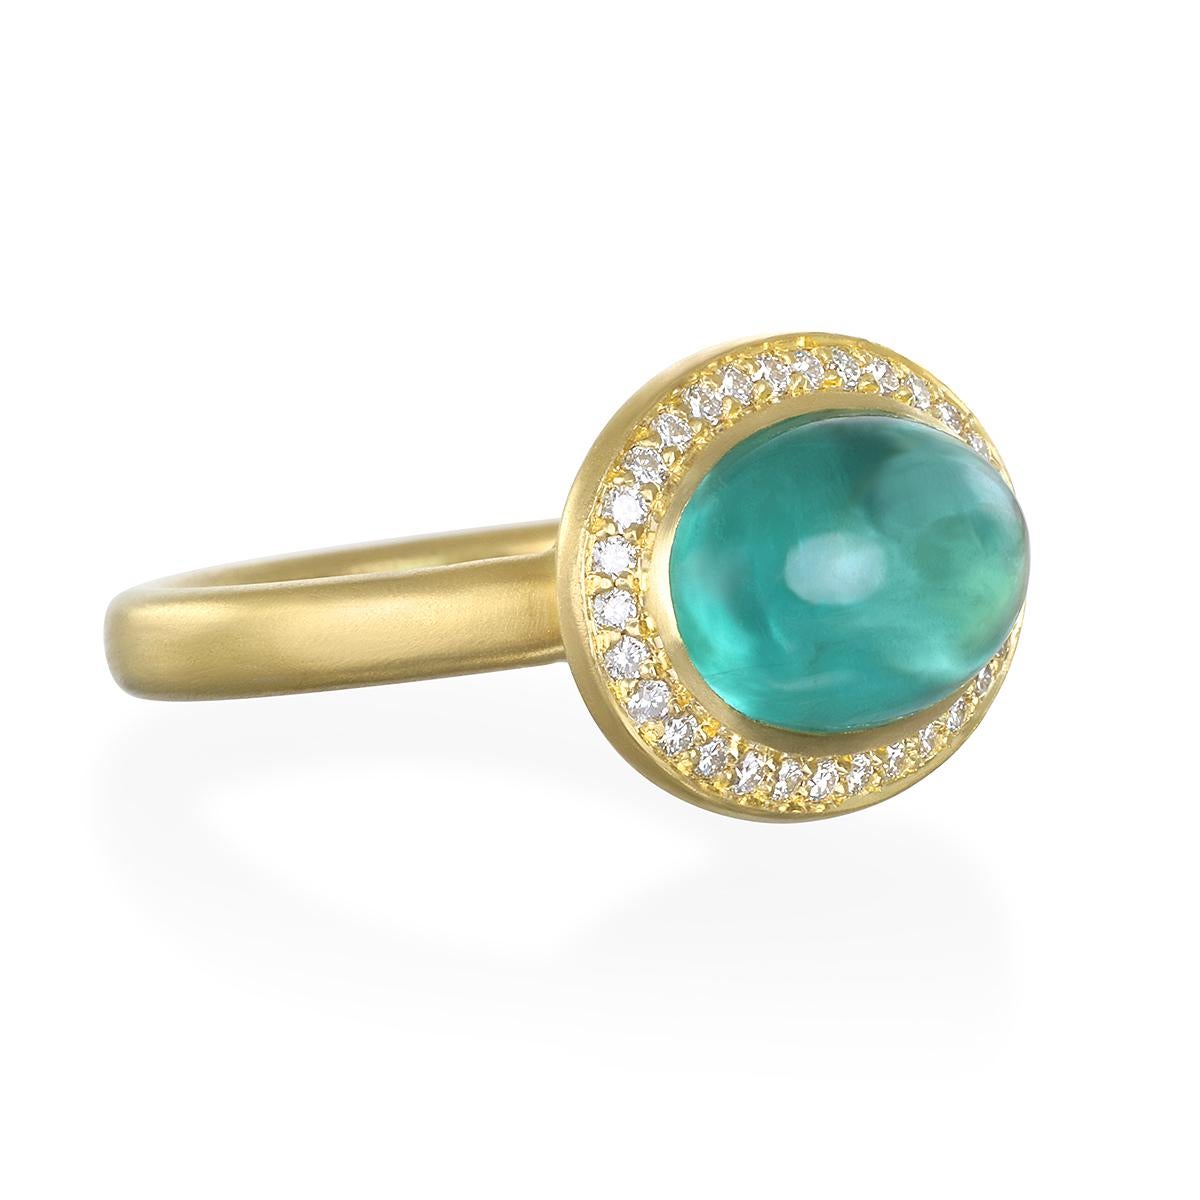 Faye Kim's spectacular 18 Karat Gold Diamond Halo Blue-Green Tourmaline Ring, with its matte finish, is evocative of both modern and vintage styles. The tourmaline's luminscent blue green hue is complemented by its lovely diamond halo. The ring